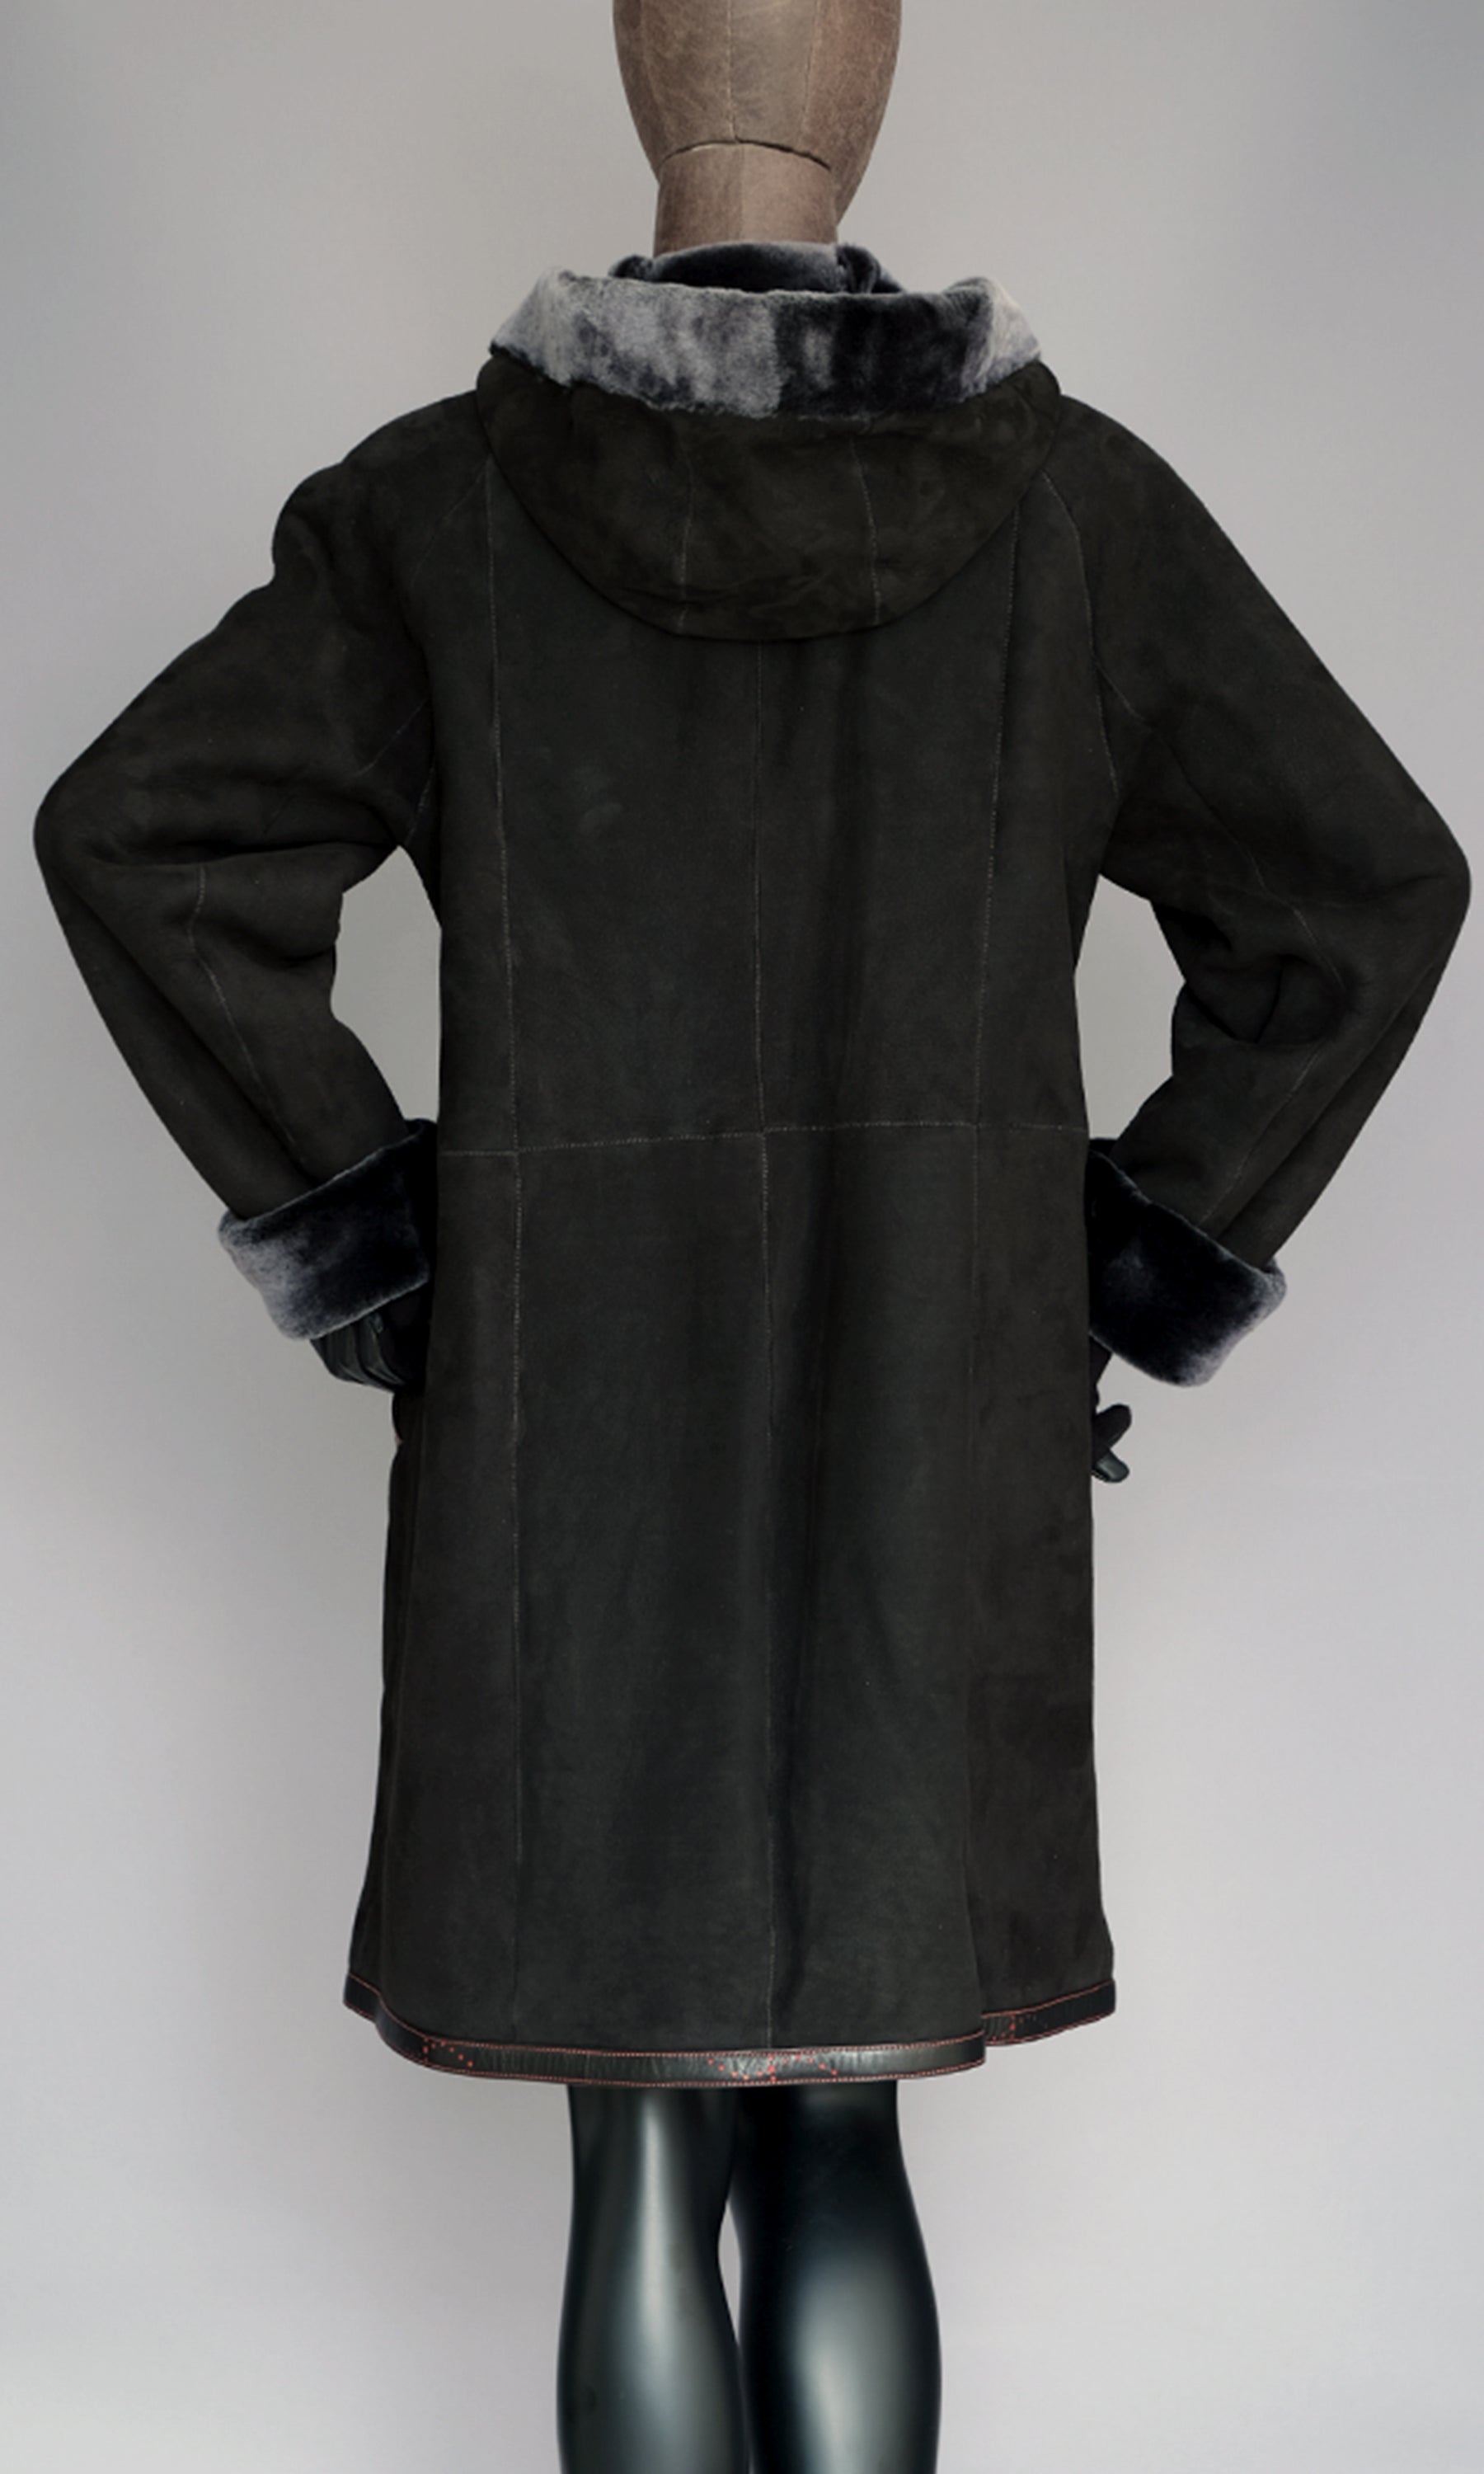 Black Suede Shearling Coat with Hood size medium 10